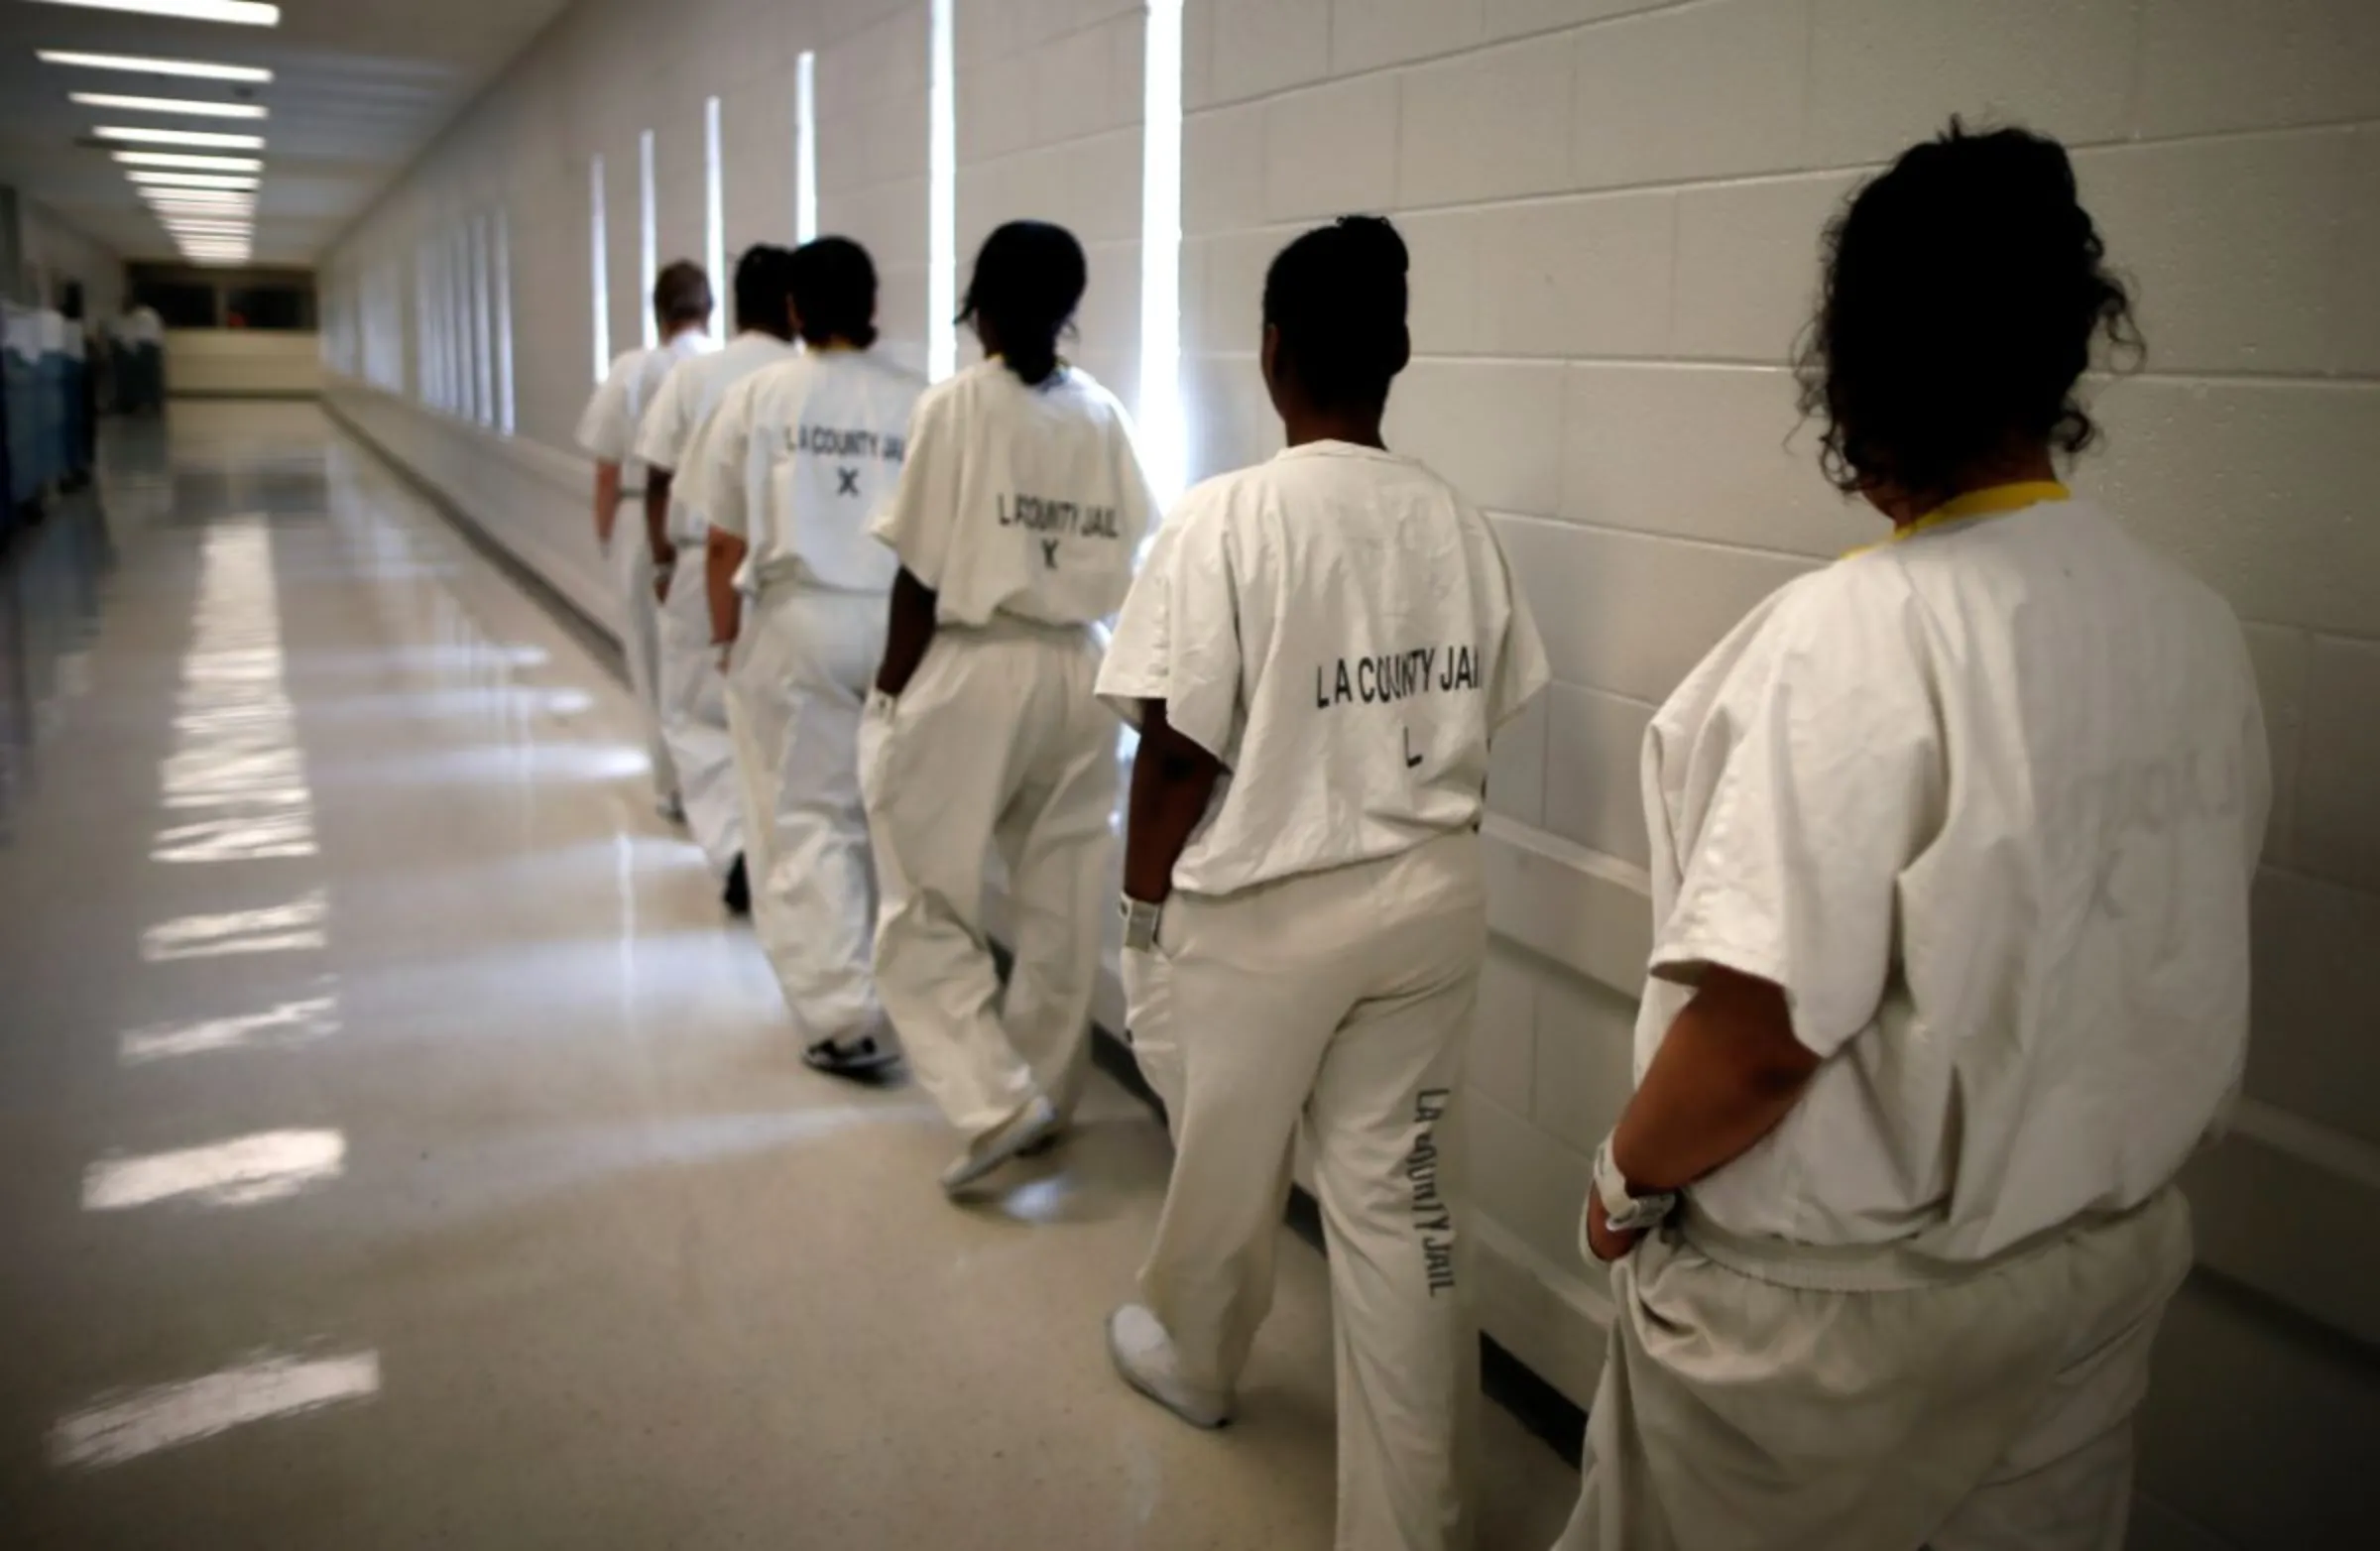 Women walk along a corridor at the Los Angeles County women's jail in Lynwood, California April 26, 2013. REUTERS/Lucy Nicholson